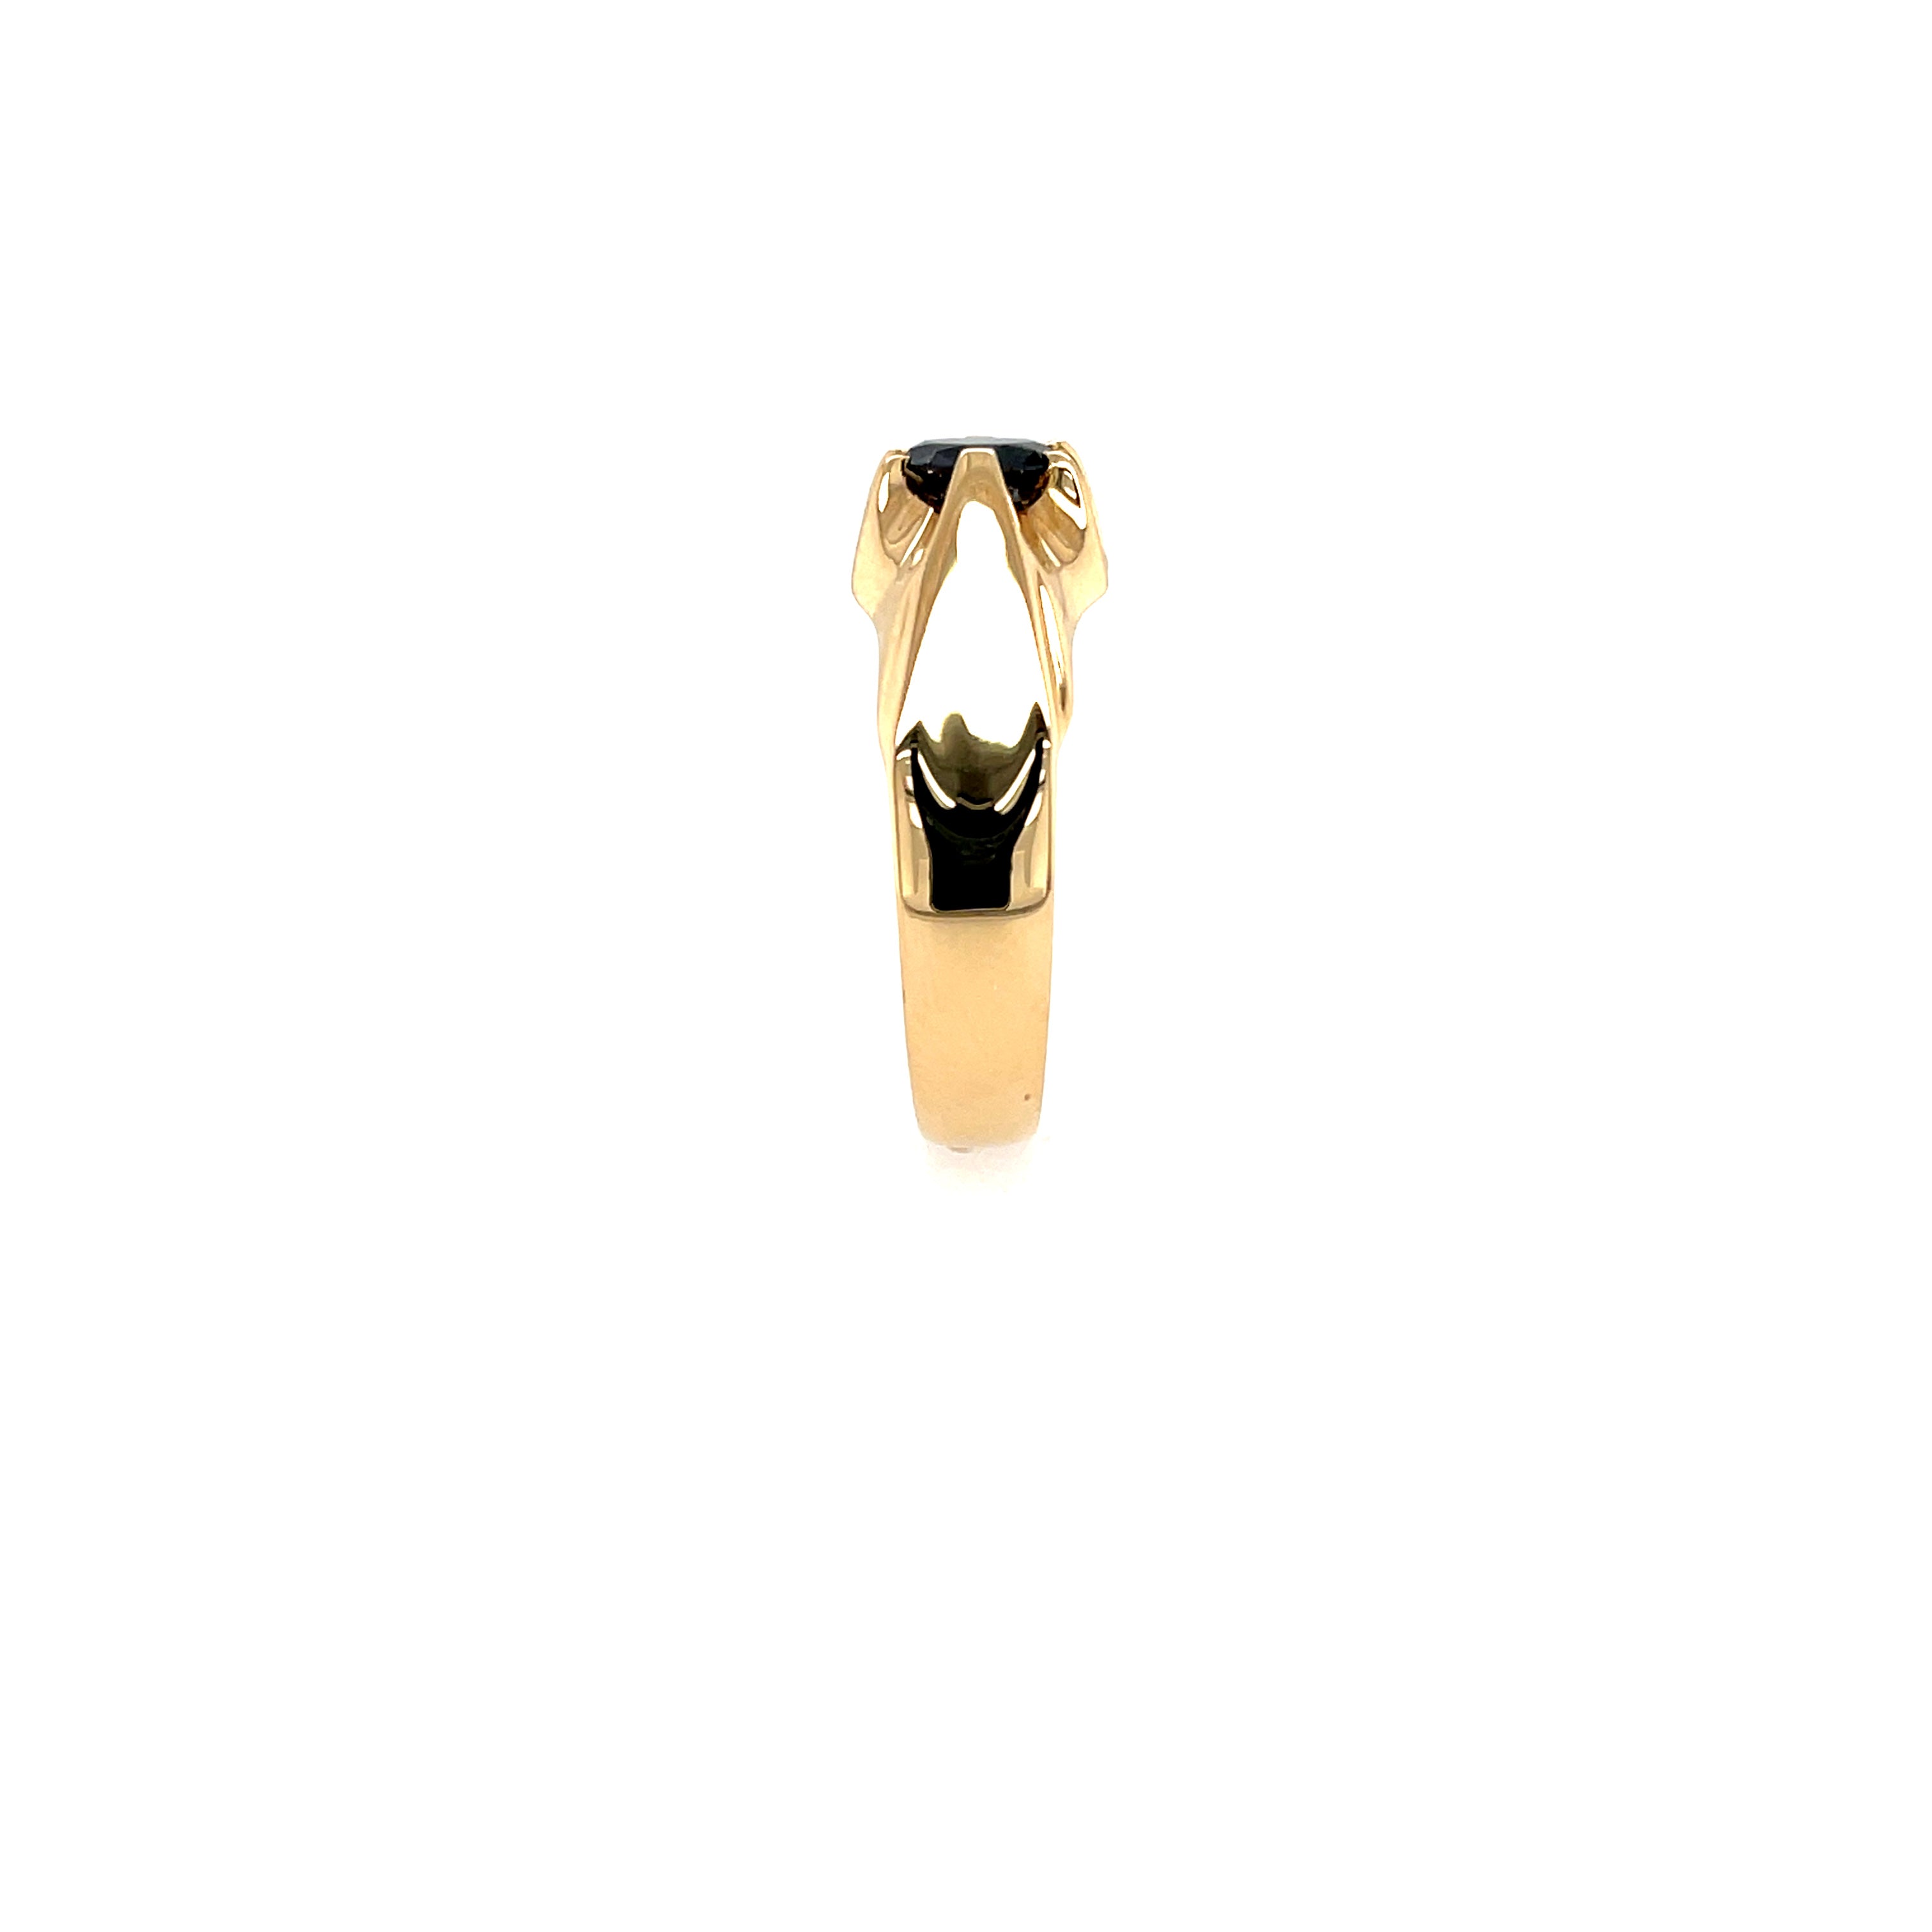 18ct Yellow Gold 0.75ct Black Diamond Solitaire Gypsy Ring